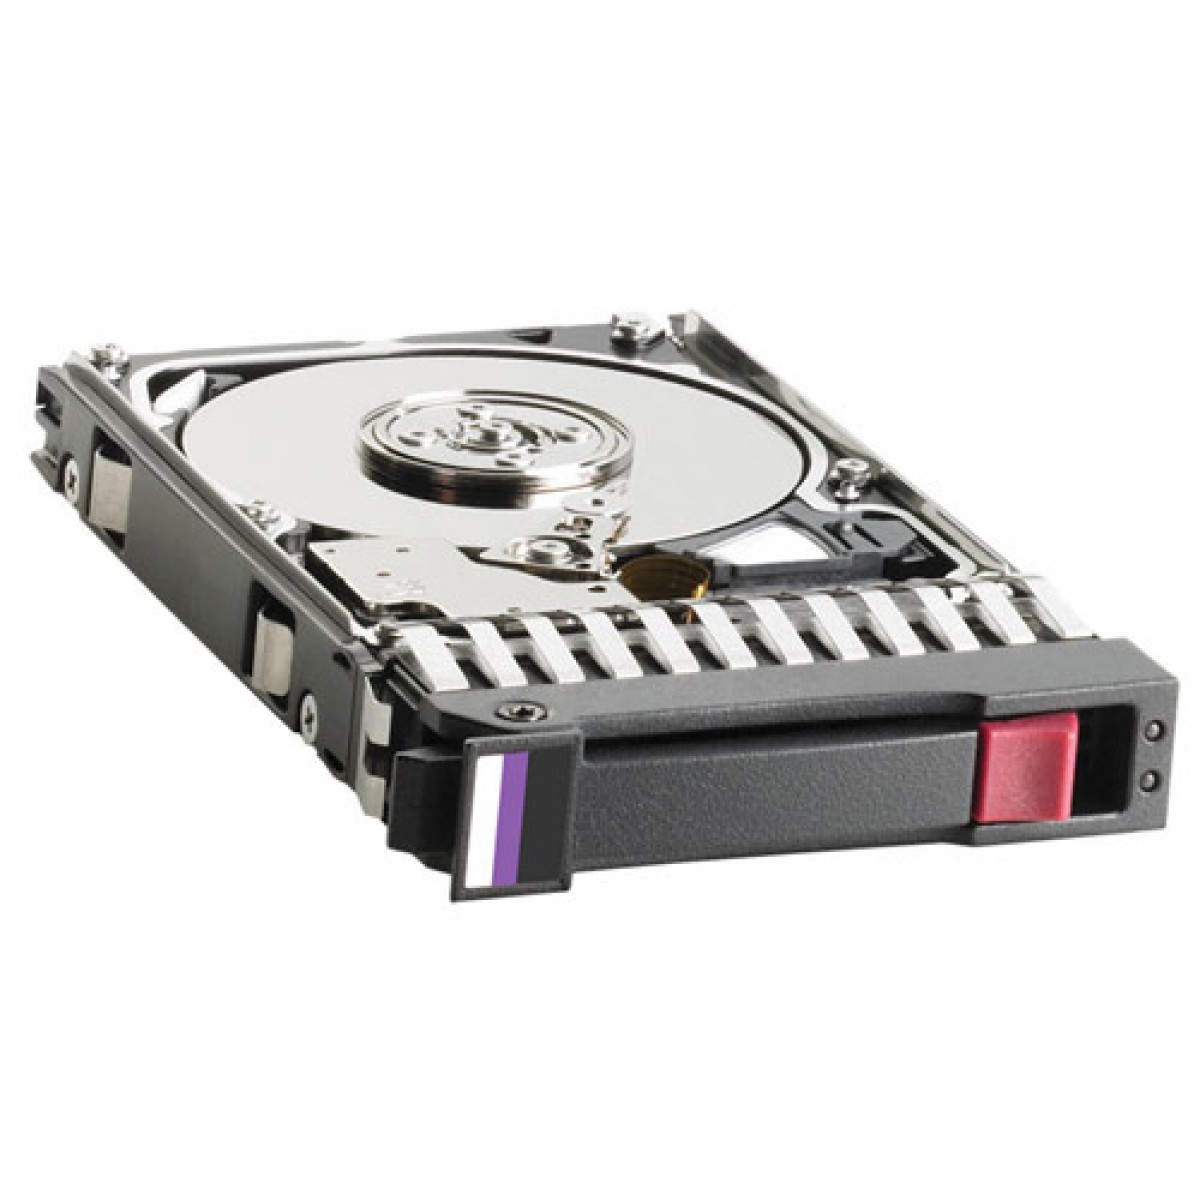 AB147A | HP 72.8GB 15000RPM Ultra-320 SCSI Hot-Pluggable LVD 80-Pin 3.5-inch Hard Drive